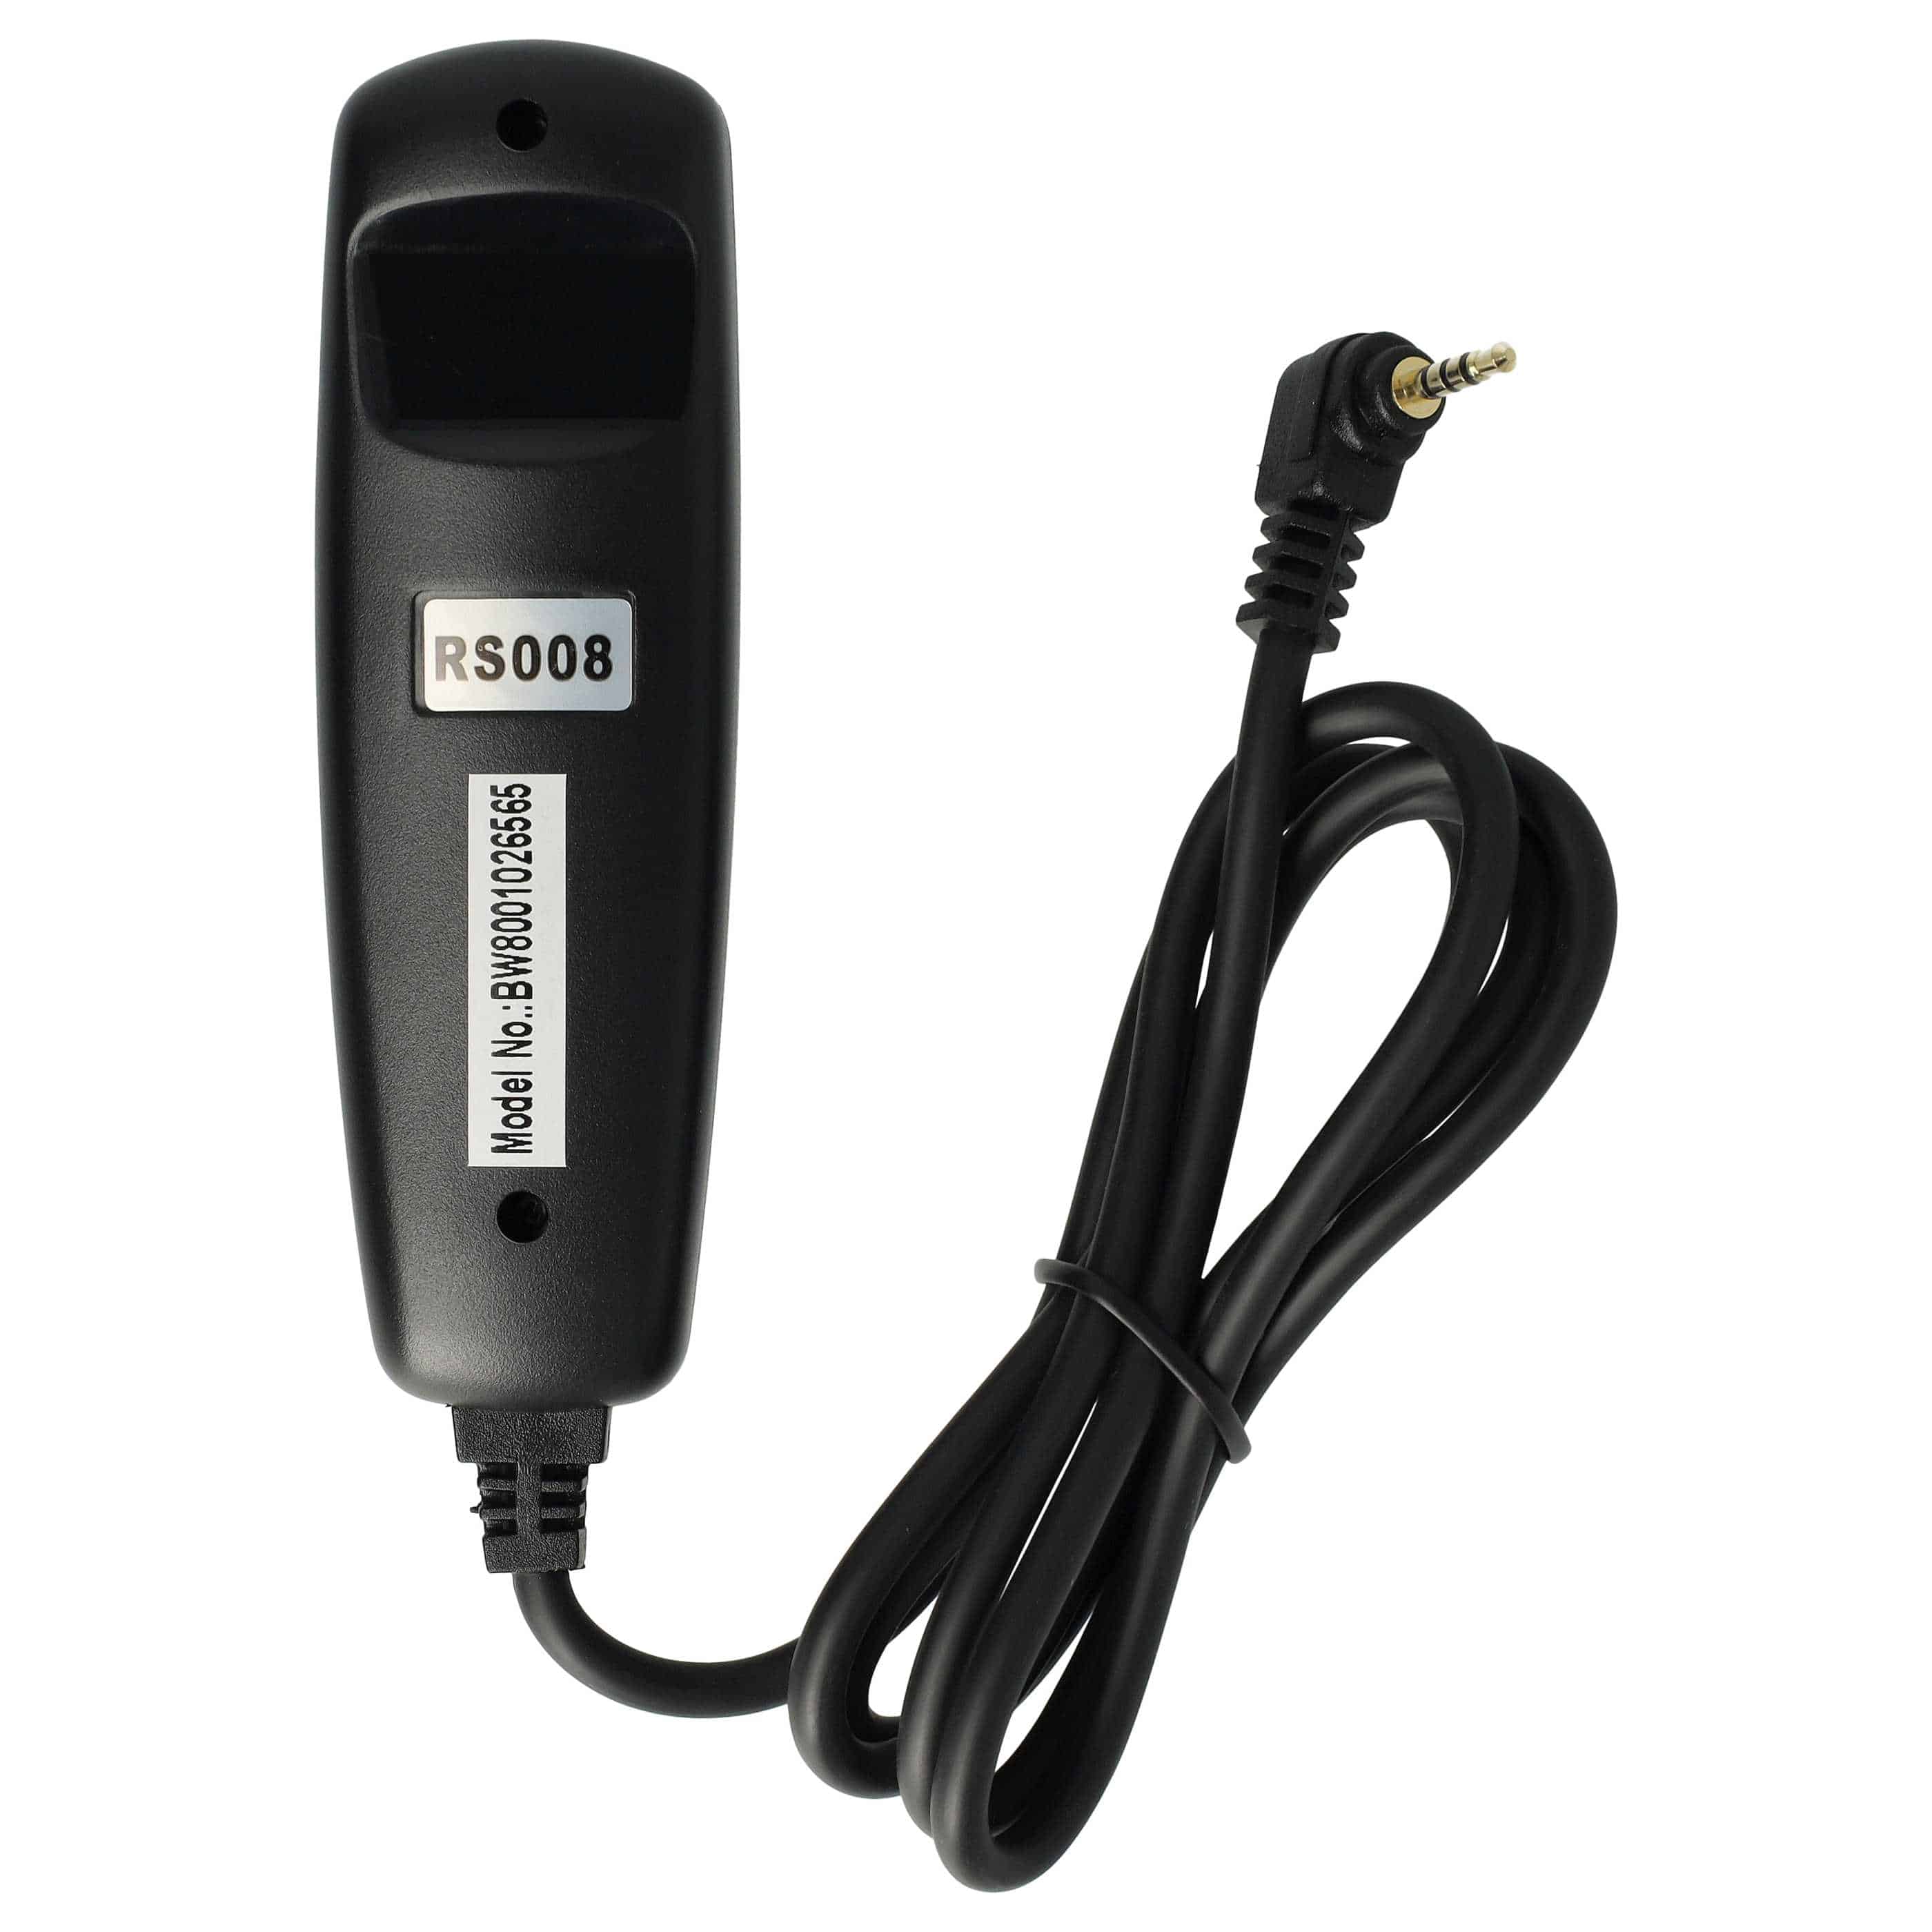 Remote Trigger as Exchange for Panasonic DMW-RS1, DMW-RSL1 for Camera etc. 2-Step Shutter, 1 m Lead